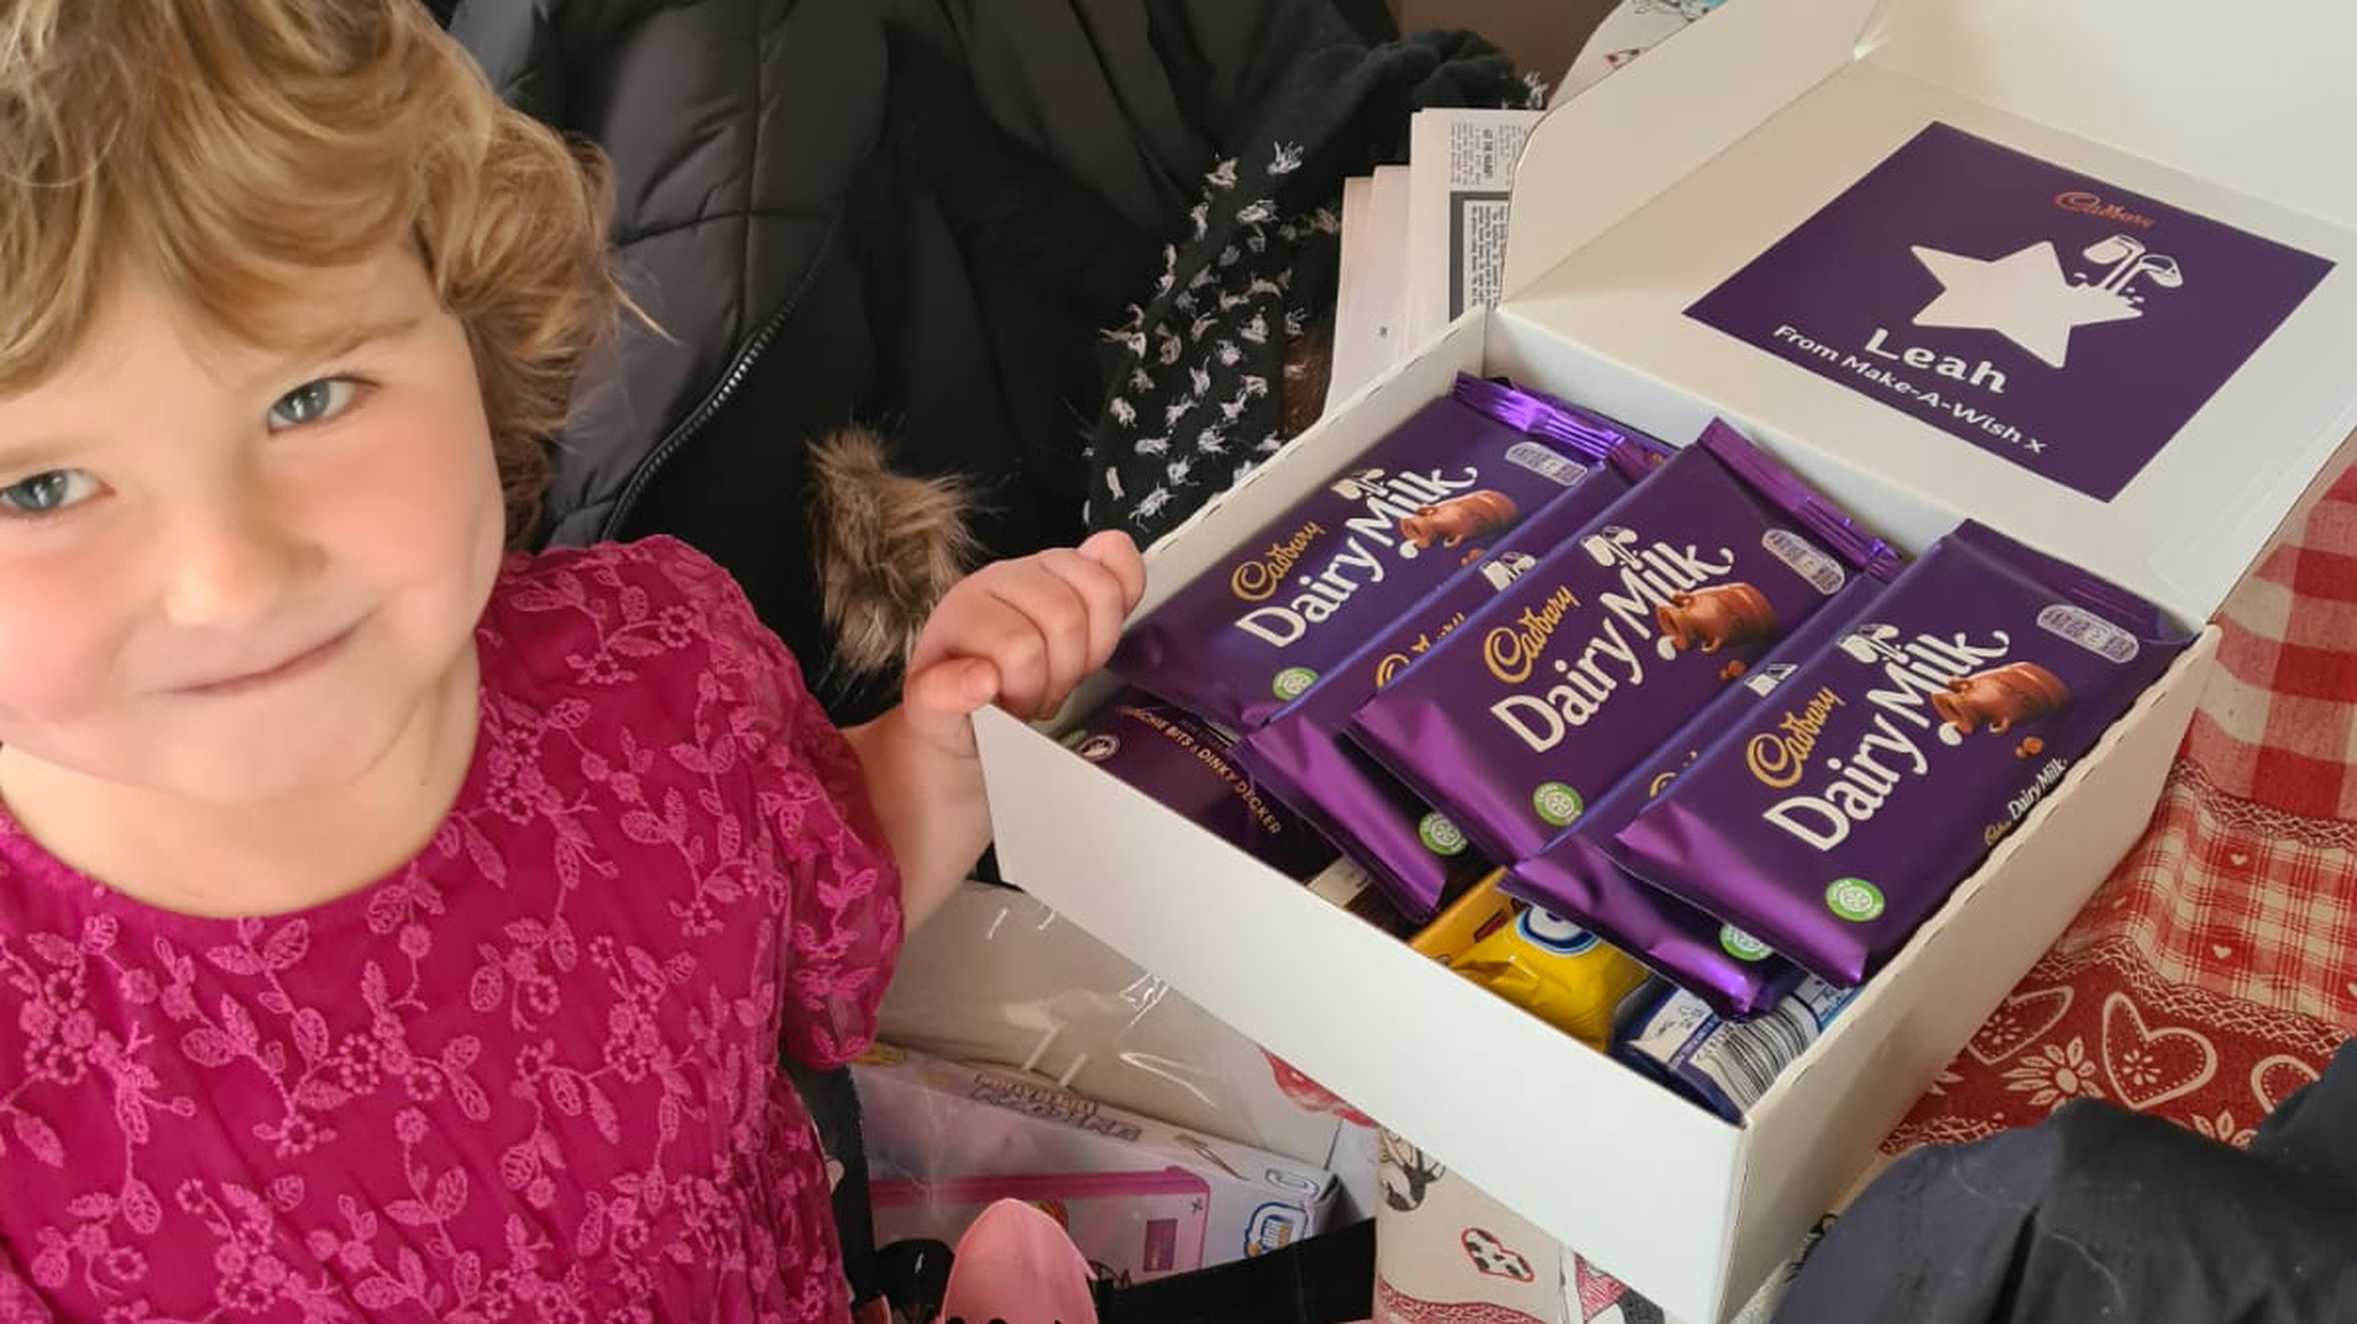 Leah , looking very happy with a big box of chocolate bars.